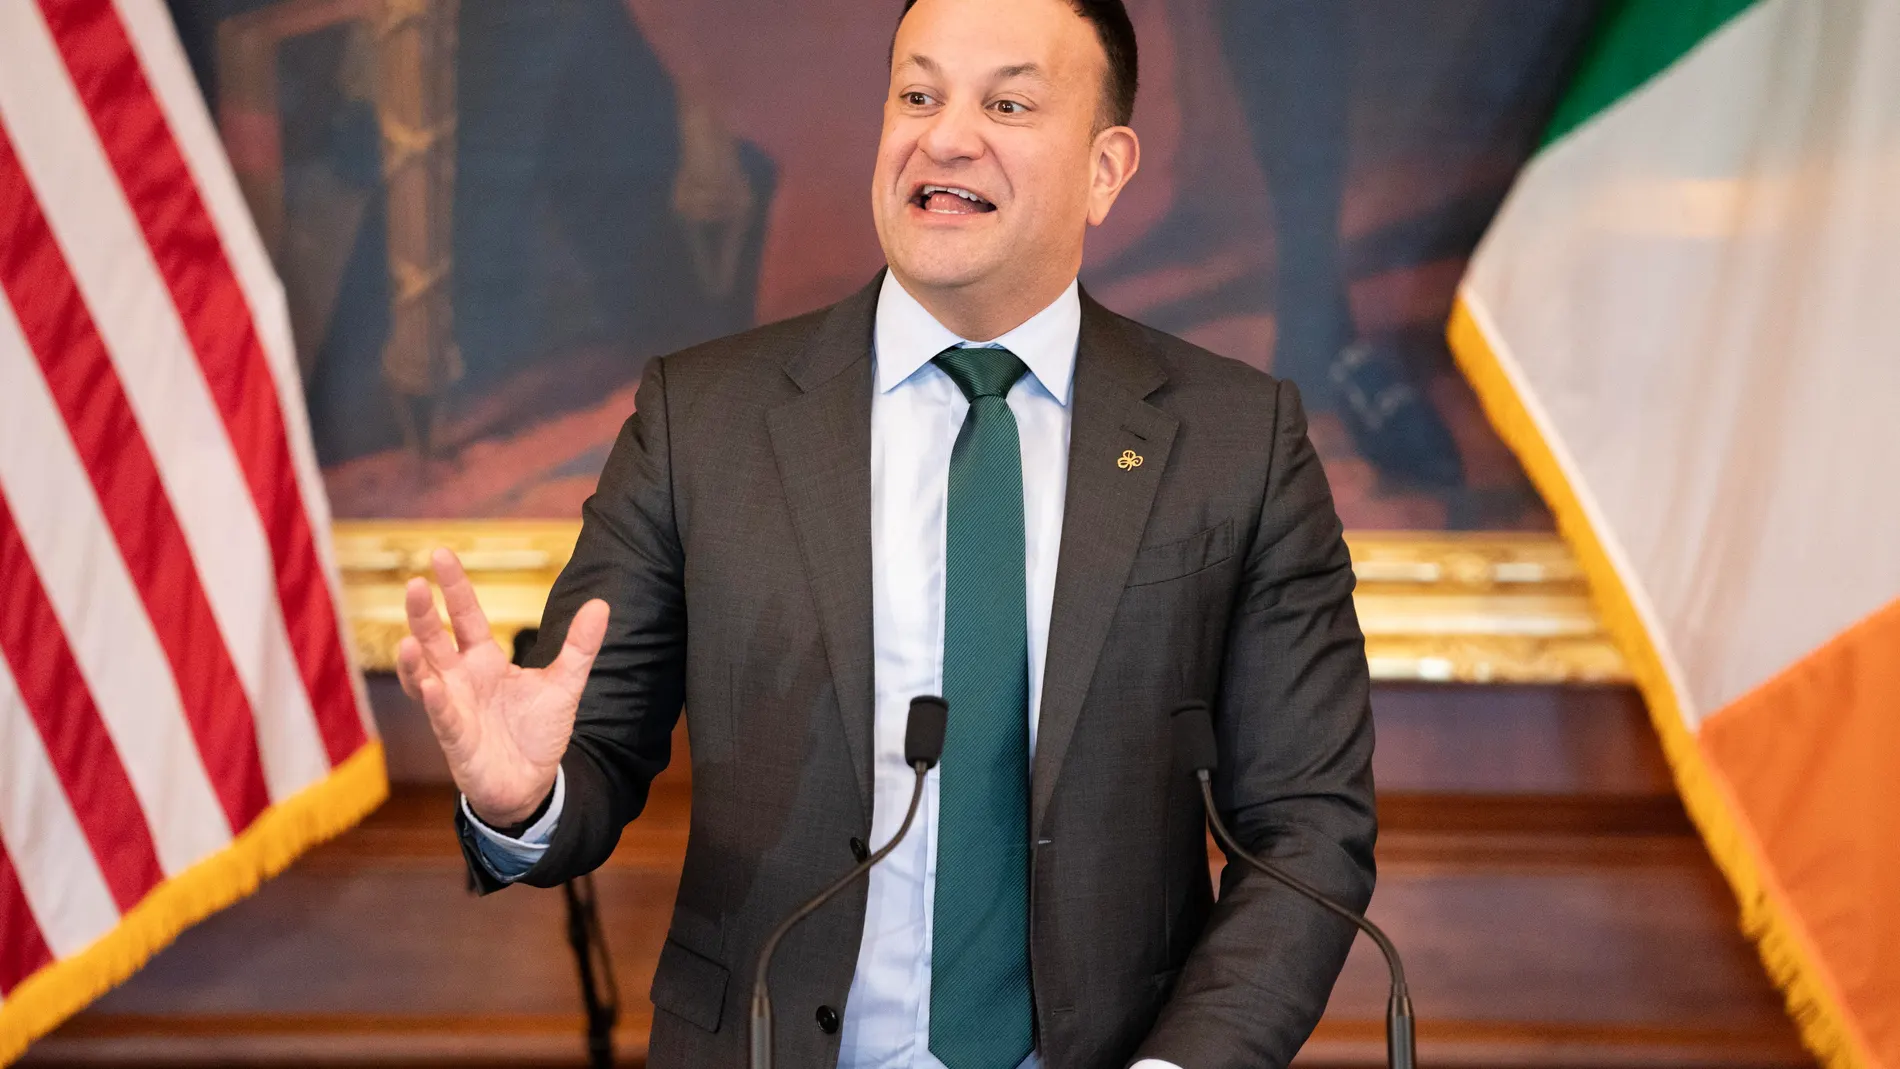 Washington (Usa), 15/03/2024.- Ireland's Taoiseach Leo Varadkar delivers remarks during during the Friends of Ireland Luncheon at the U.S. Capitol in Washington in Washington D.C., USA, 15 March 2024. President Biden and Irish Taoiseach Varadkar attended the Friends of Ireland Luncheon on Capitol Hill ahead of St. Patrick's Day, which takes place 17 March. (Irlanda) EFE/EPA/NATHAN HOWARD / POOL 